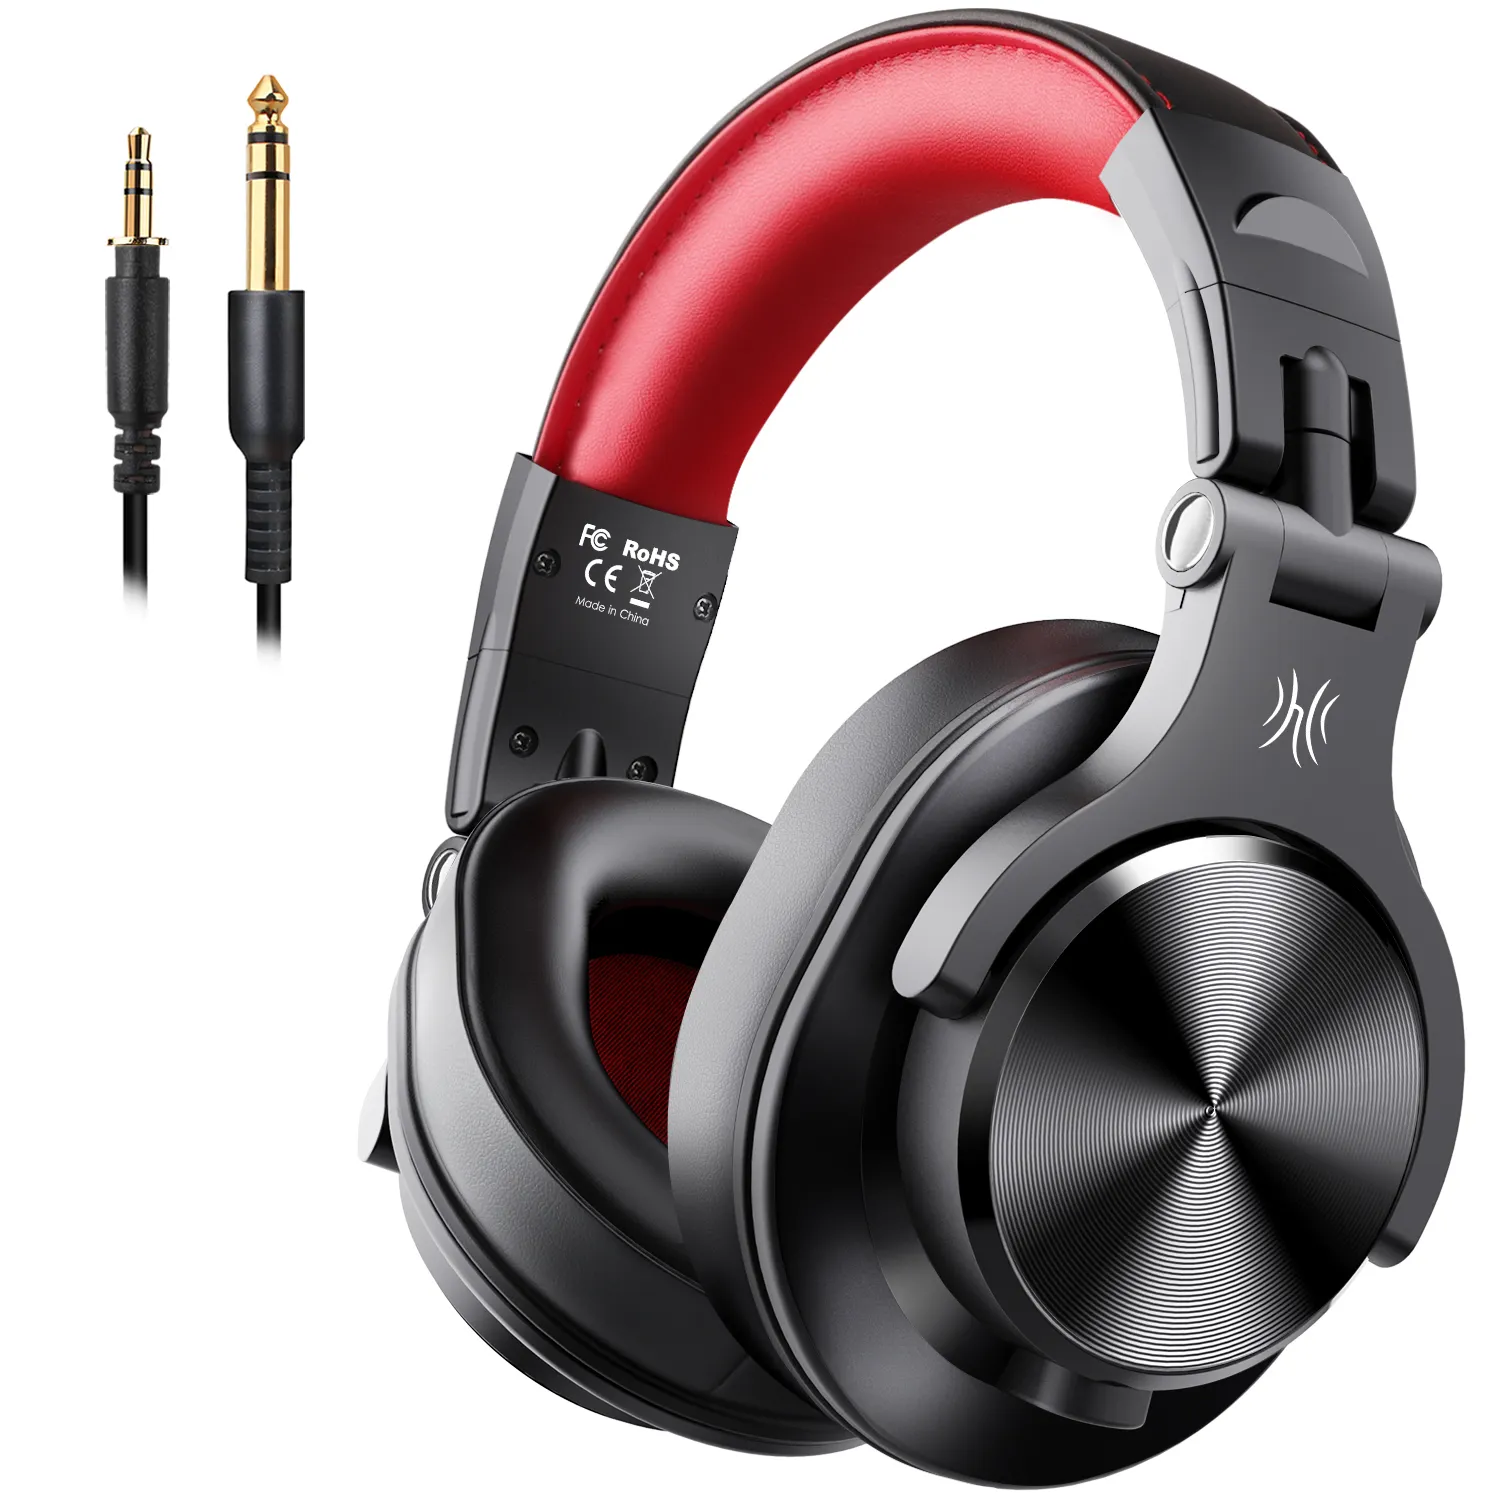 2022 Hot Selling OneOdio A70 Wireless and Wired headphones dual mode DJ Music headphones for Musician DJ Audiophile